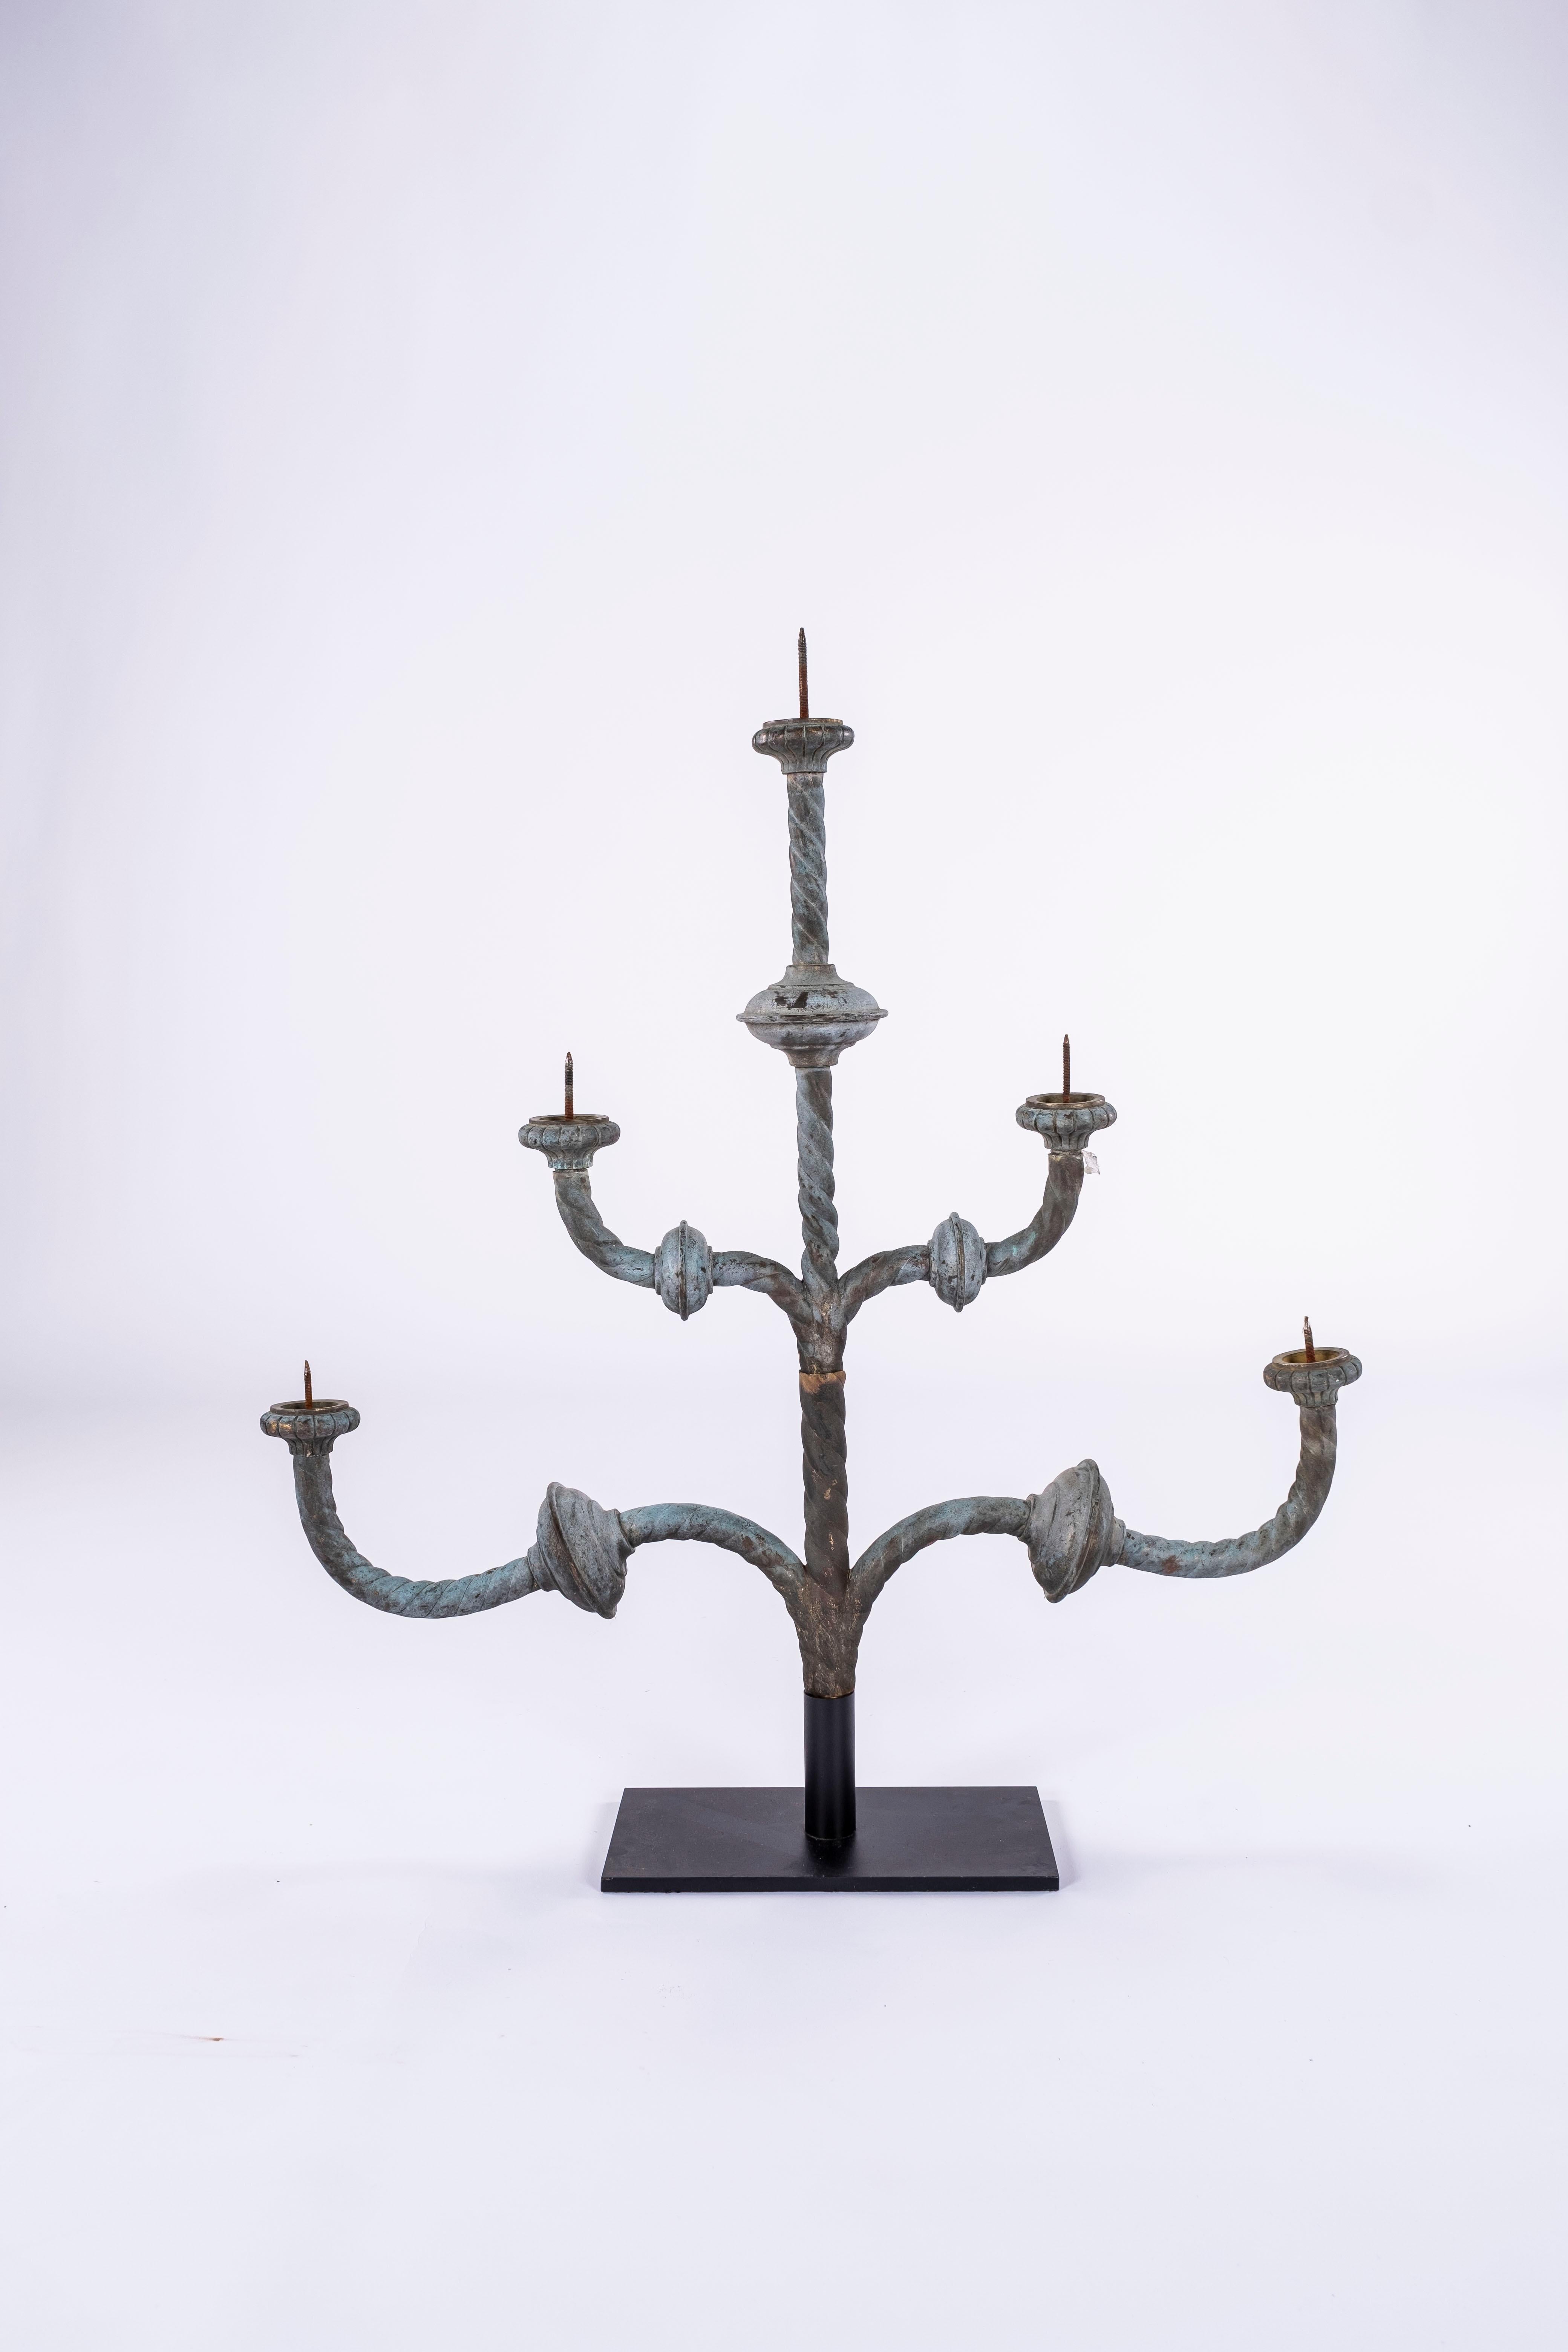 19th Century Zinc Candelabra In Good Condition For Sale In Houston, TX